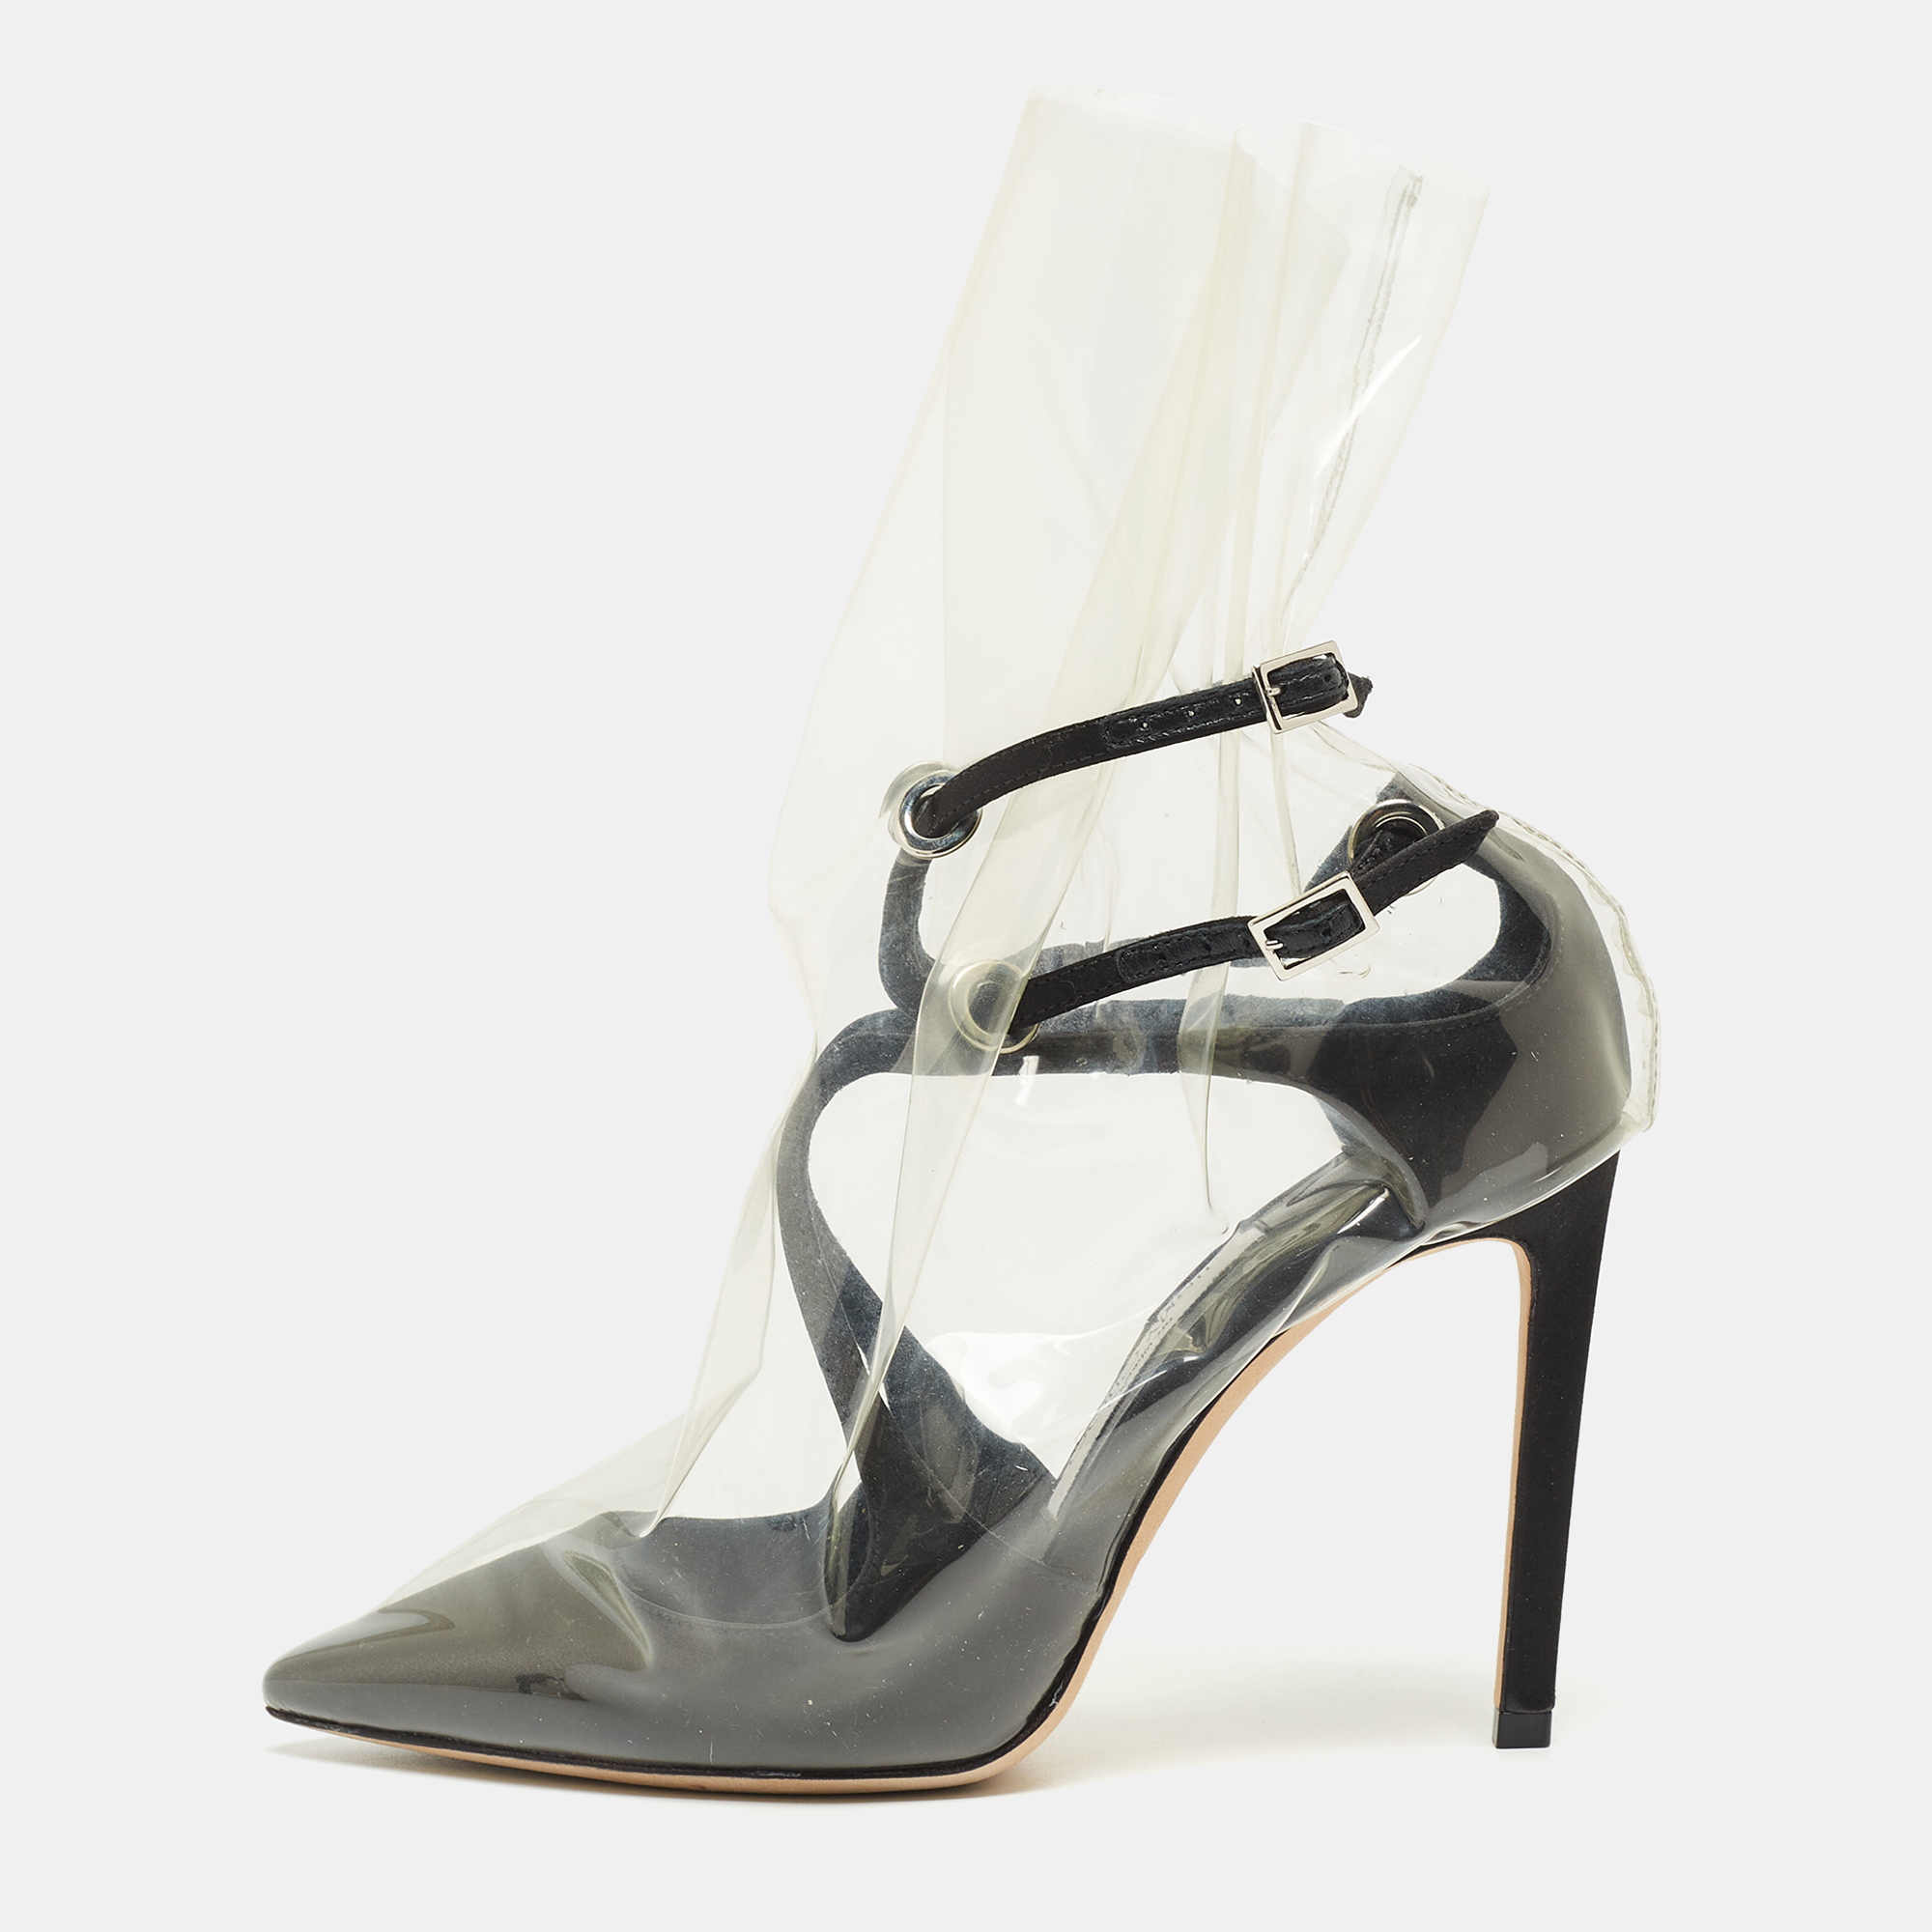 Jimmy choo x off-white black/transparent satin and pvc pointed toe ankle boots size 36